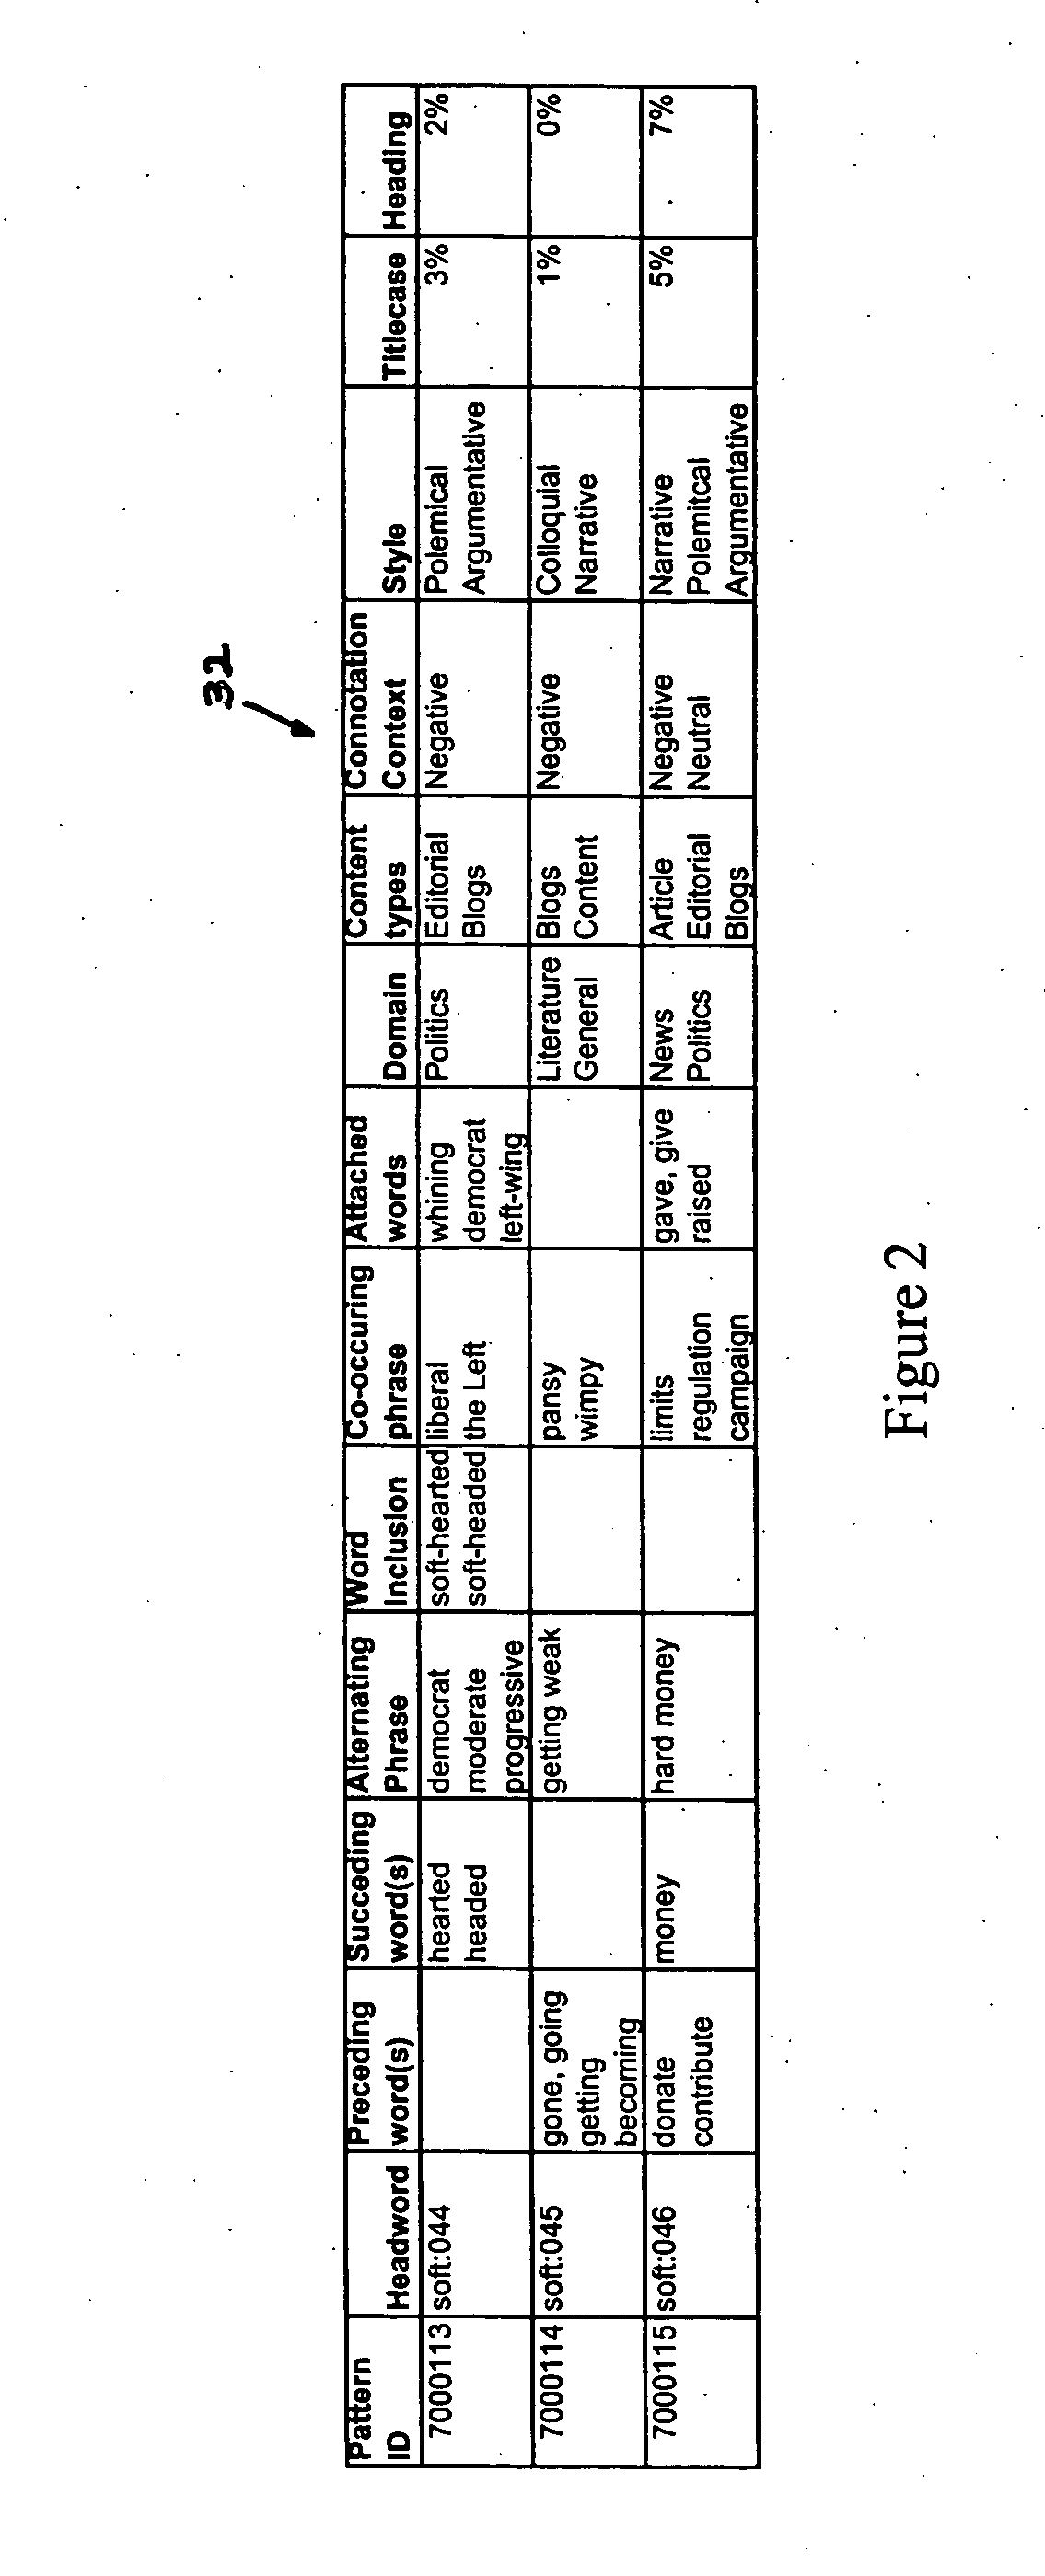 Method and system for semantic search and retrieval of electronic documents